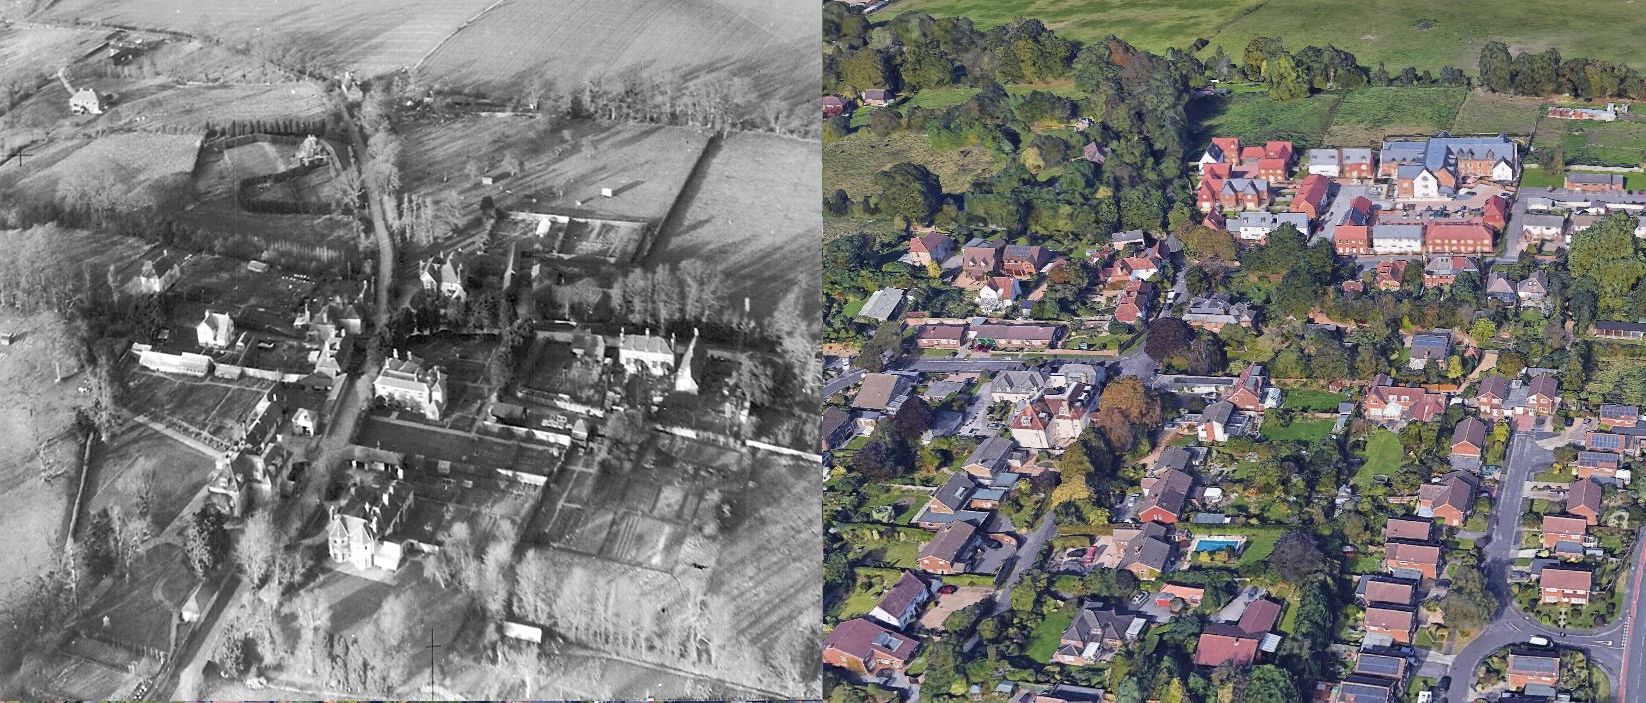 Catisfield from the air showing the (now gone) Elmshurst, Catisfield House, The Limes......